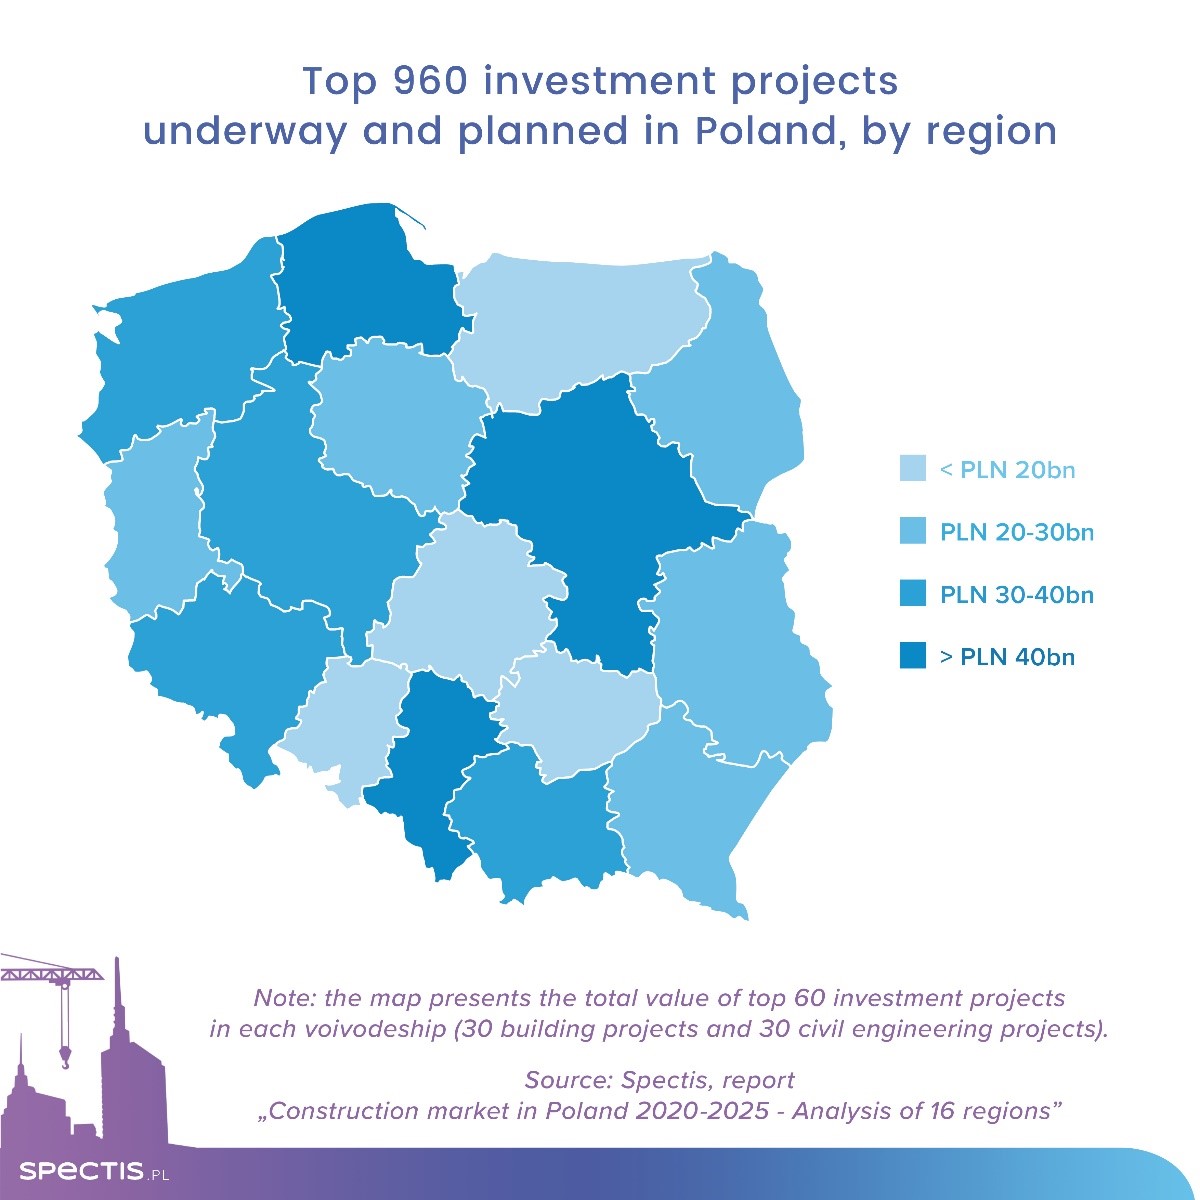 Nearly thousand top projects in Poland worth €120bn